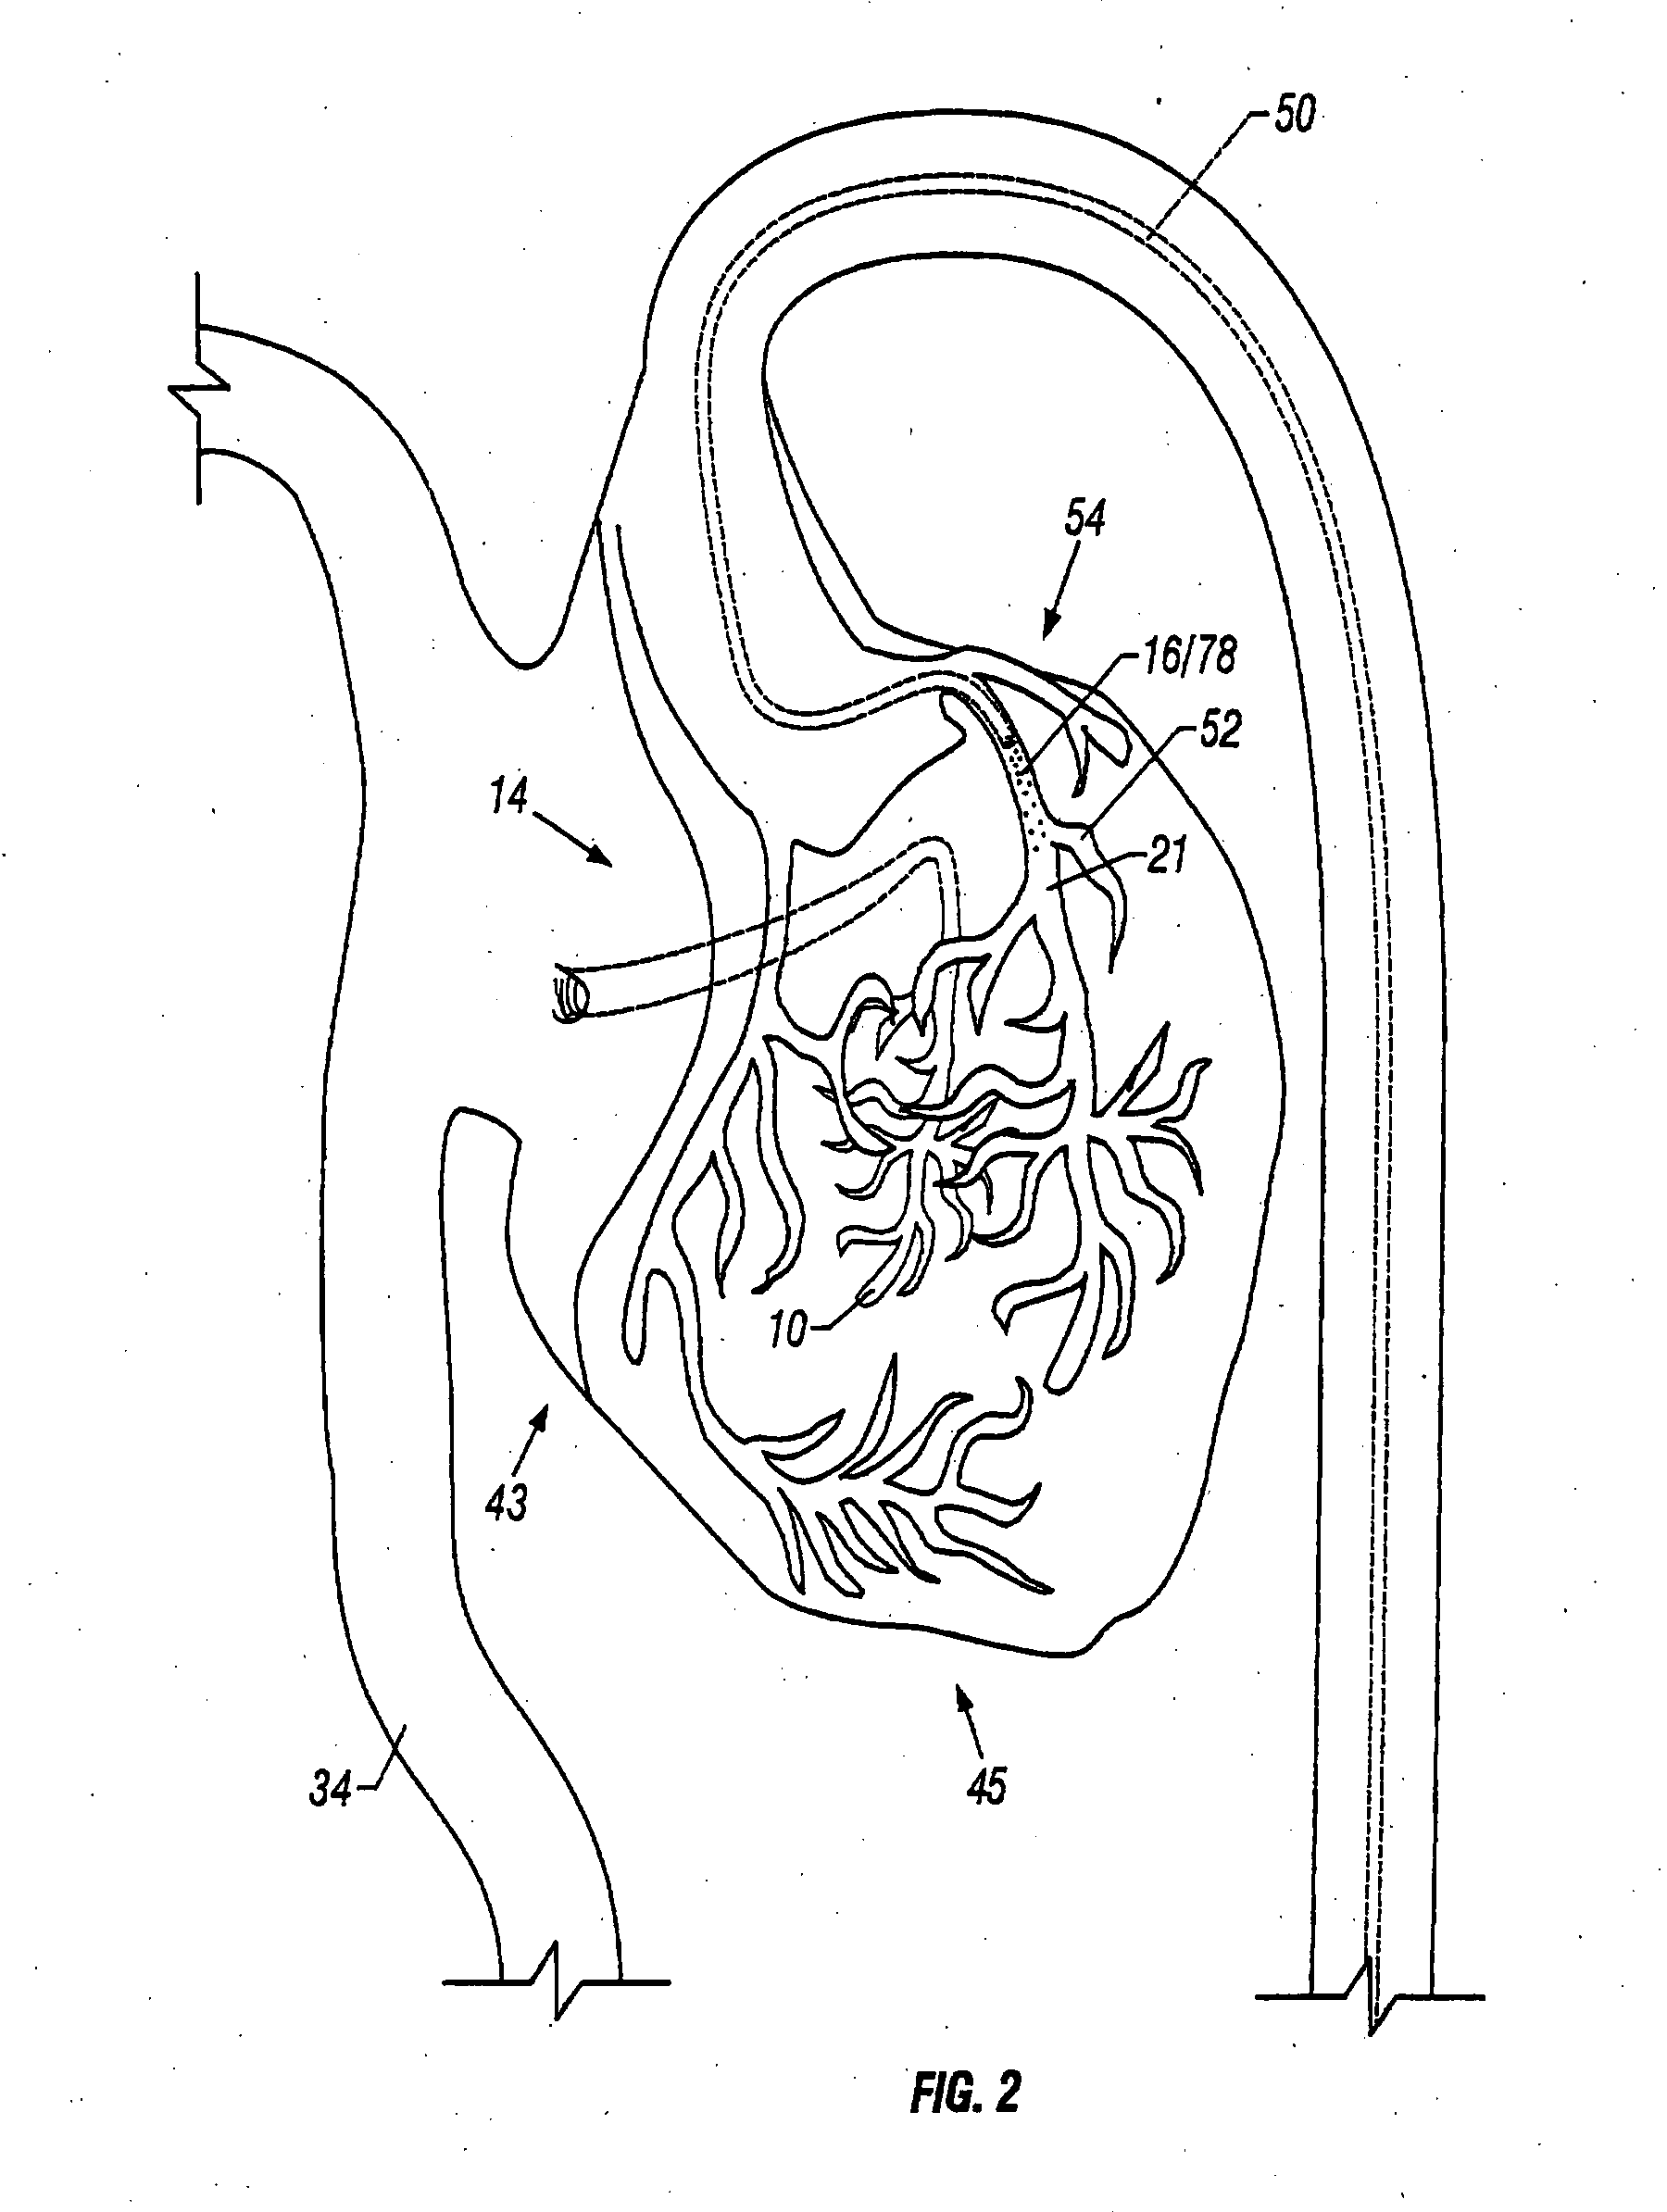 Method and apparatus to remove substances from vessels of the heart and other parts of the body to minimize or avoid renal or other harm or dysfunction